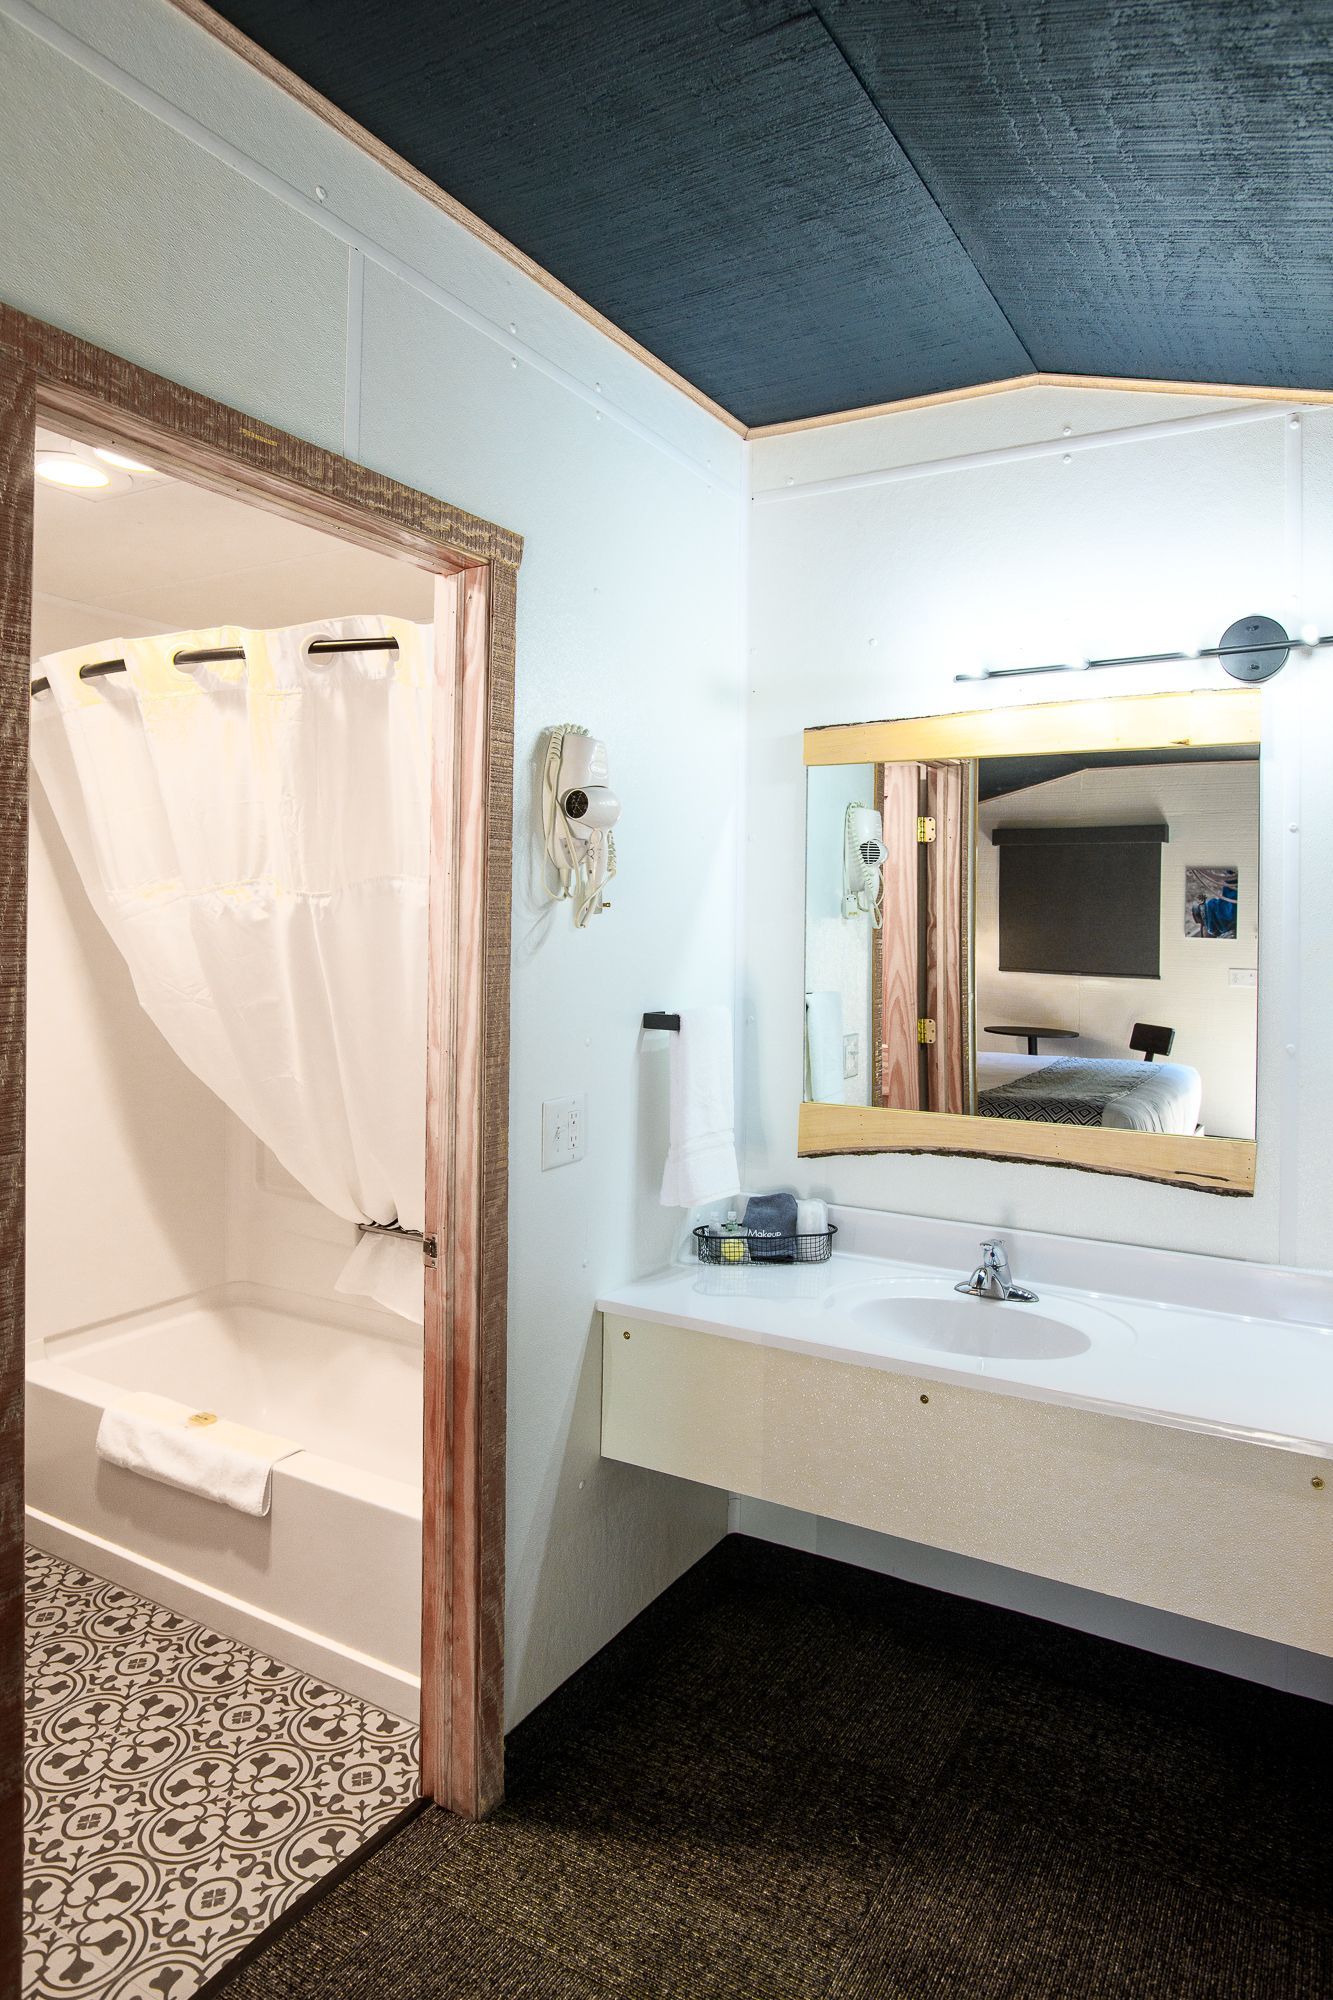 A bathroom in a hotel room with a sink , shower and mirror.